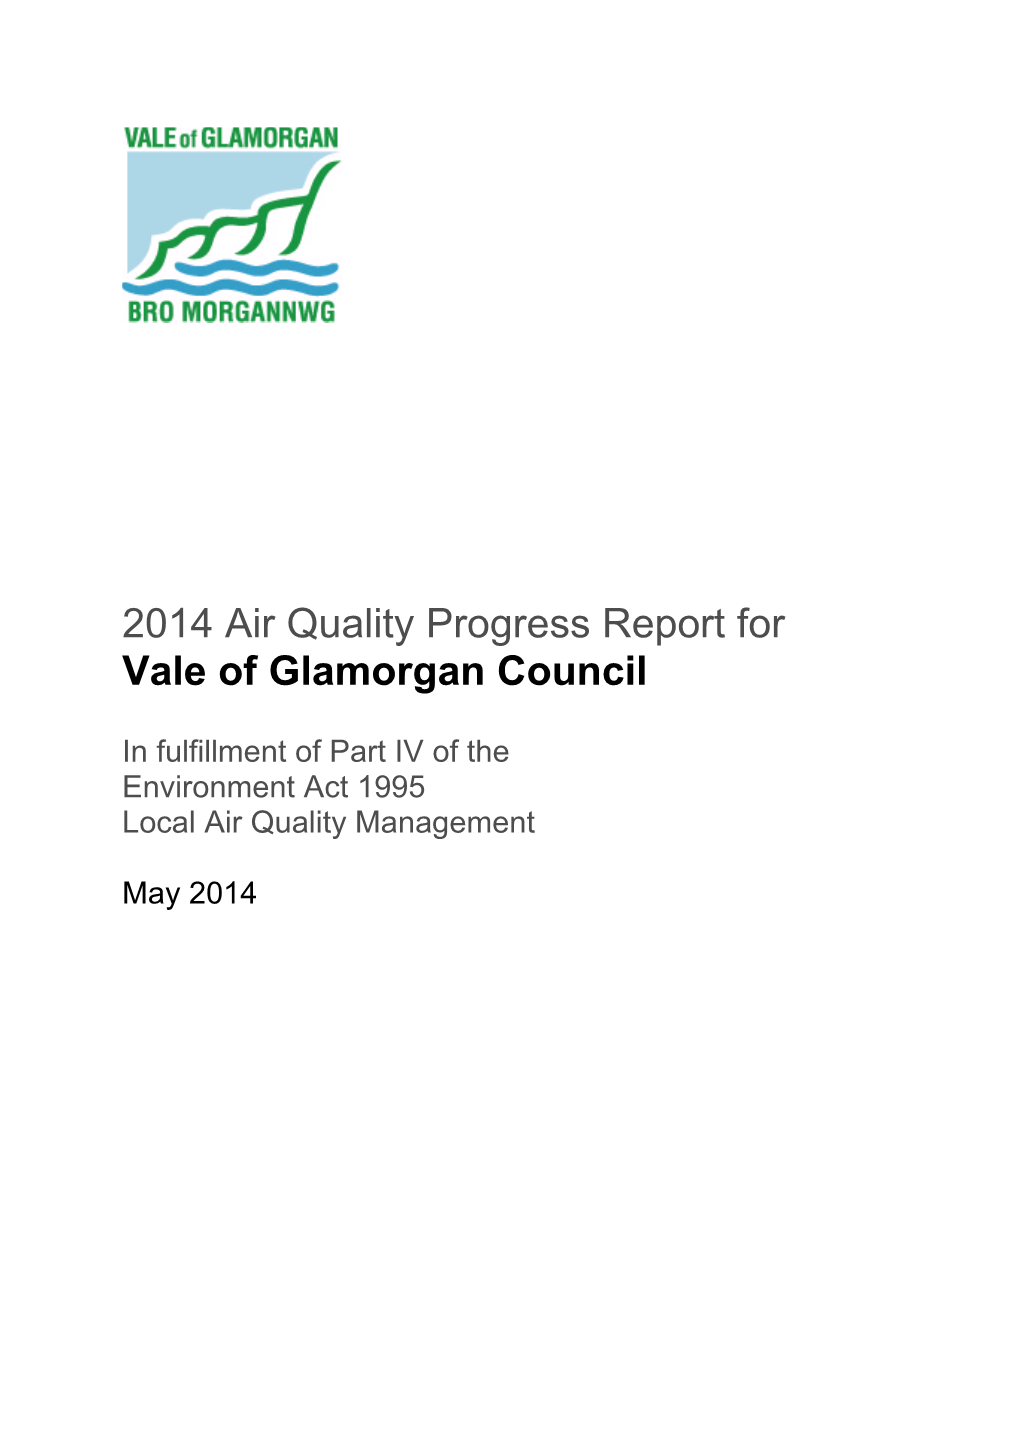 2014 Air Quality Progress Report for Vale of Glamorgan Council